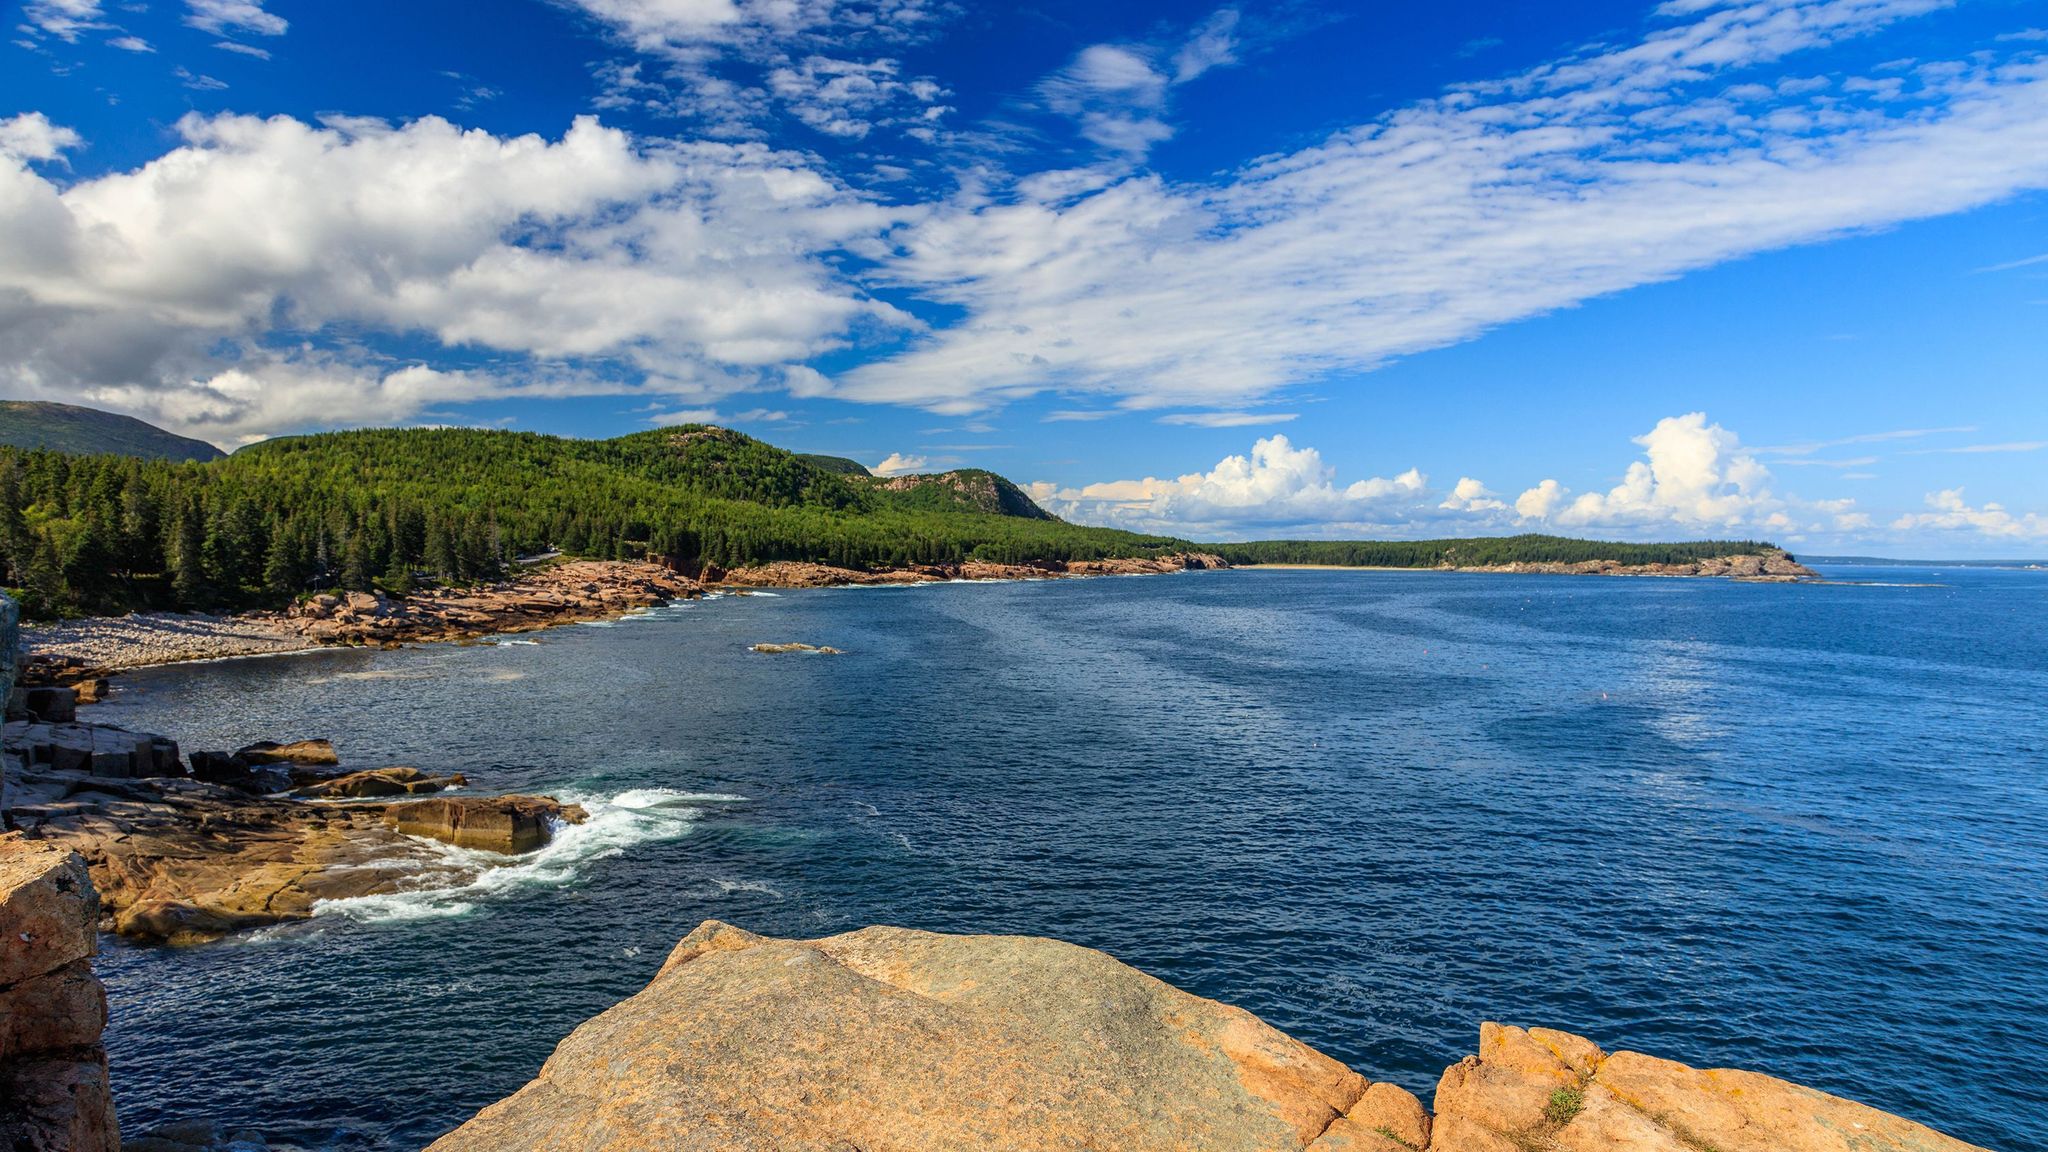 Millions of people come to Acadia for our distinctive rocky coastline.